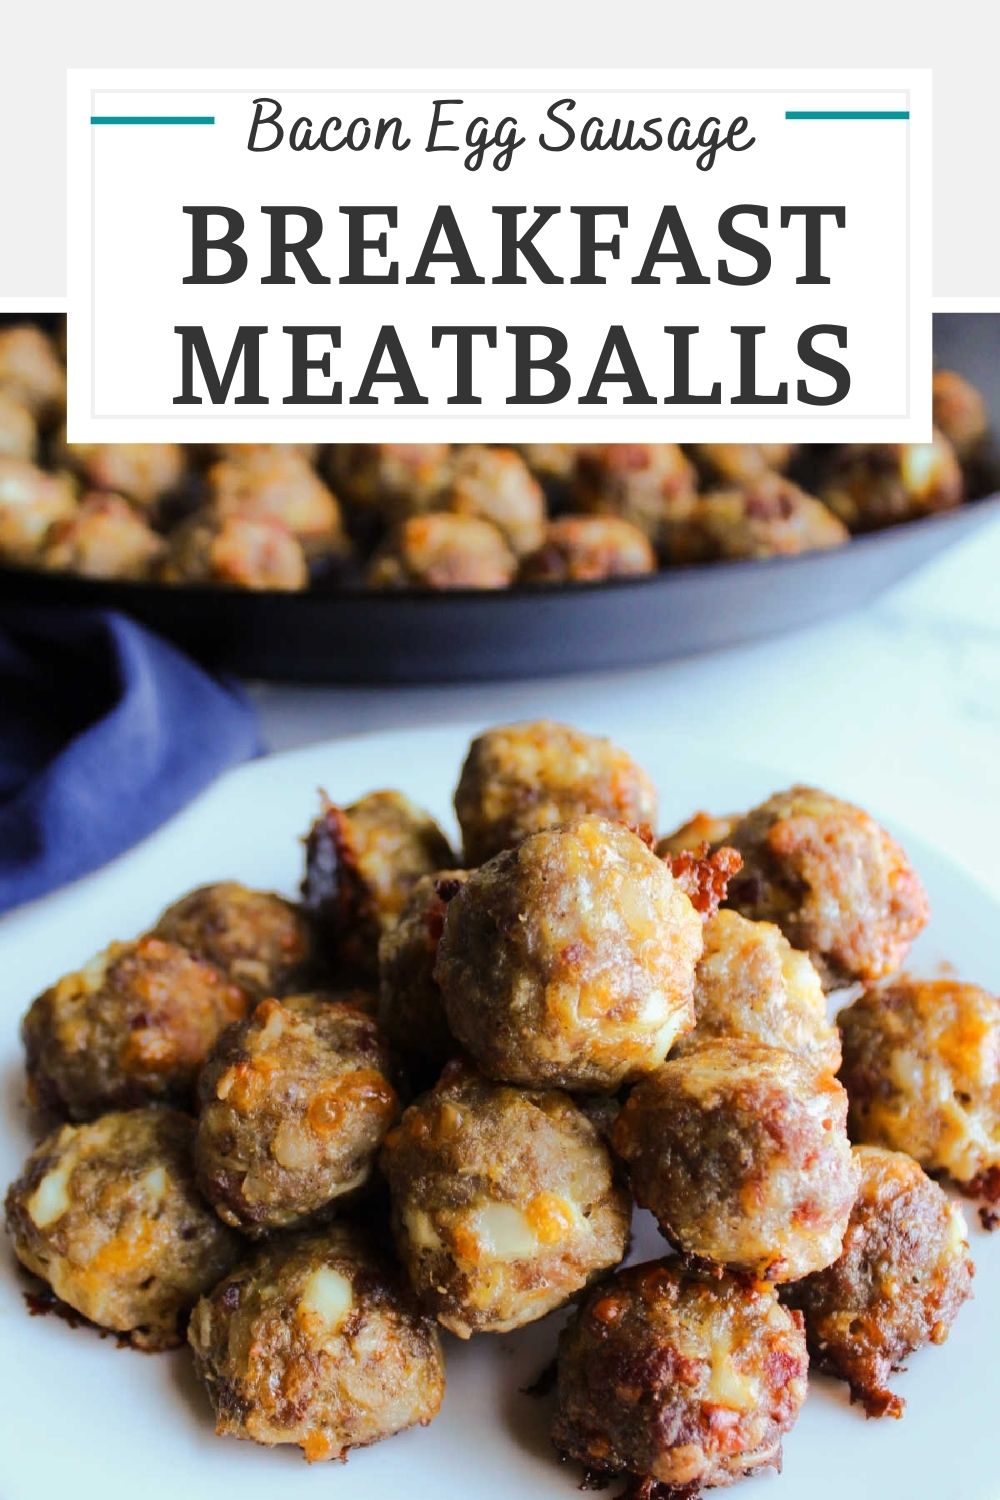 These meatballs have all of your breakfast favorites packed into a tiny bite sized meatballs. That's right, there is sausage, bacon, eggs and cheese all inside. They are a tasty and fun way to change up your brunch menu.